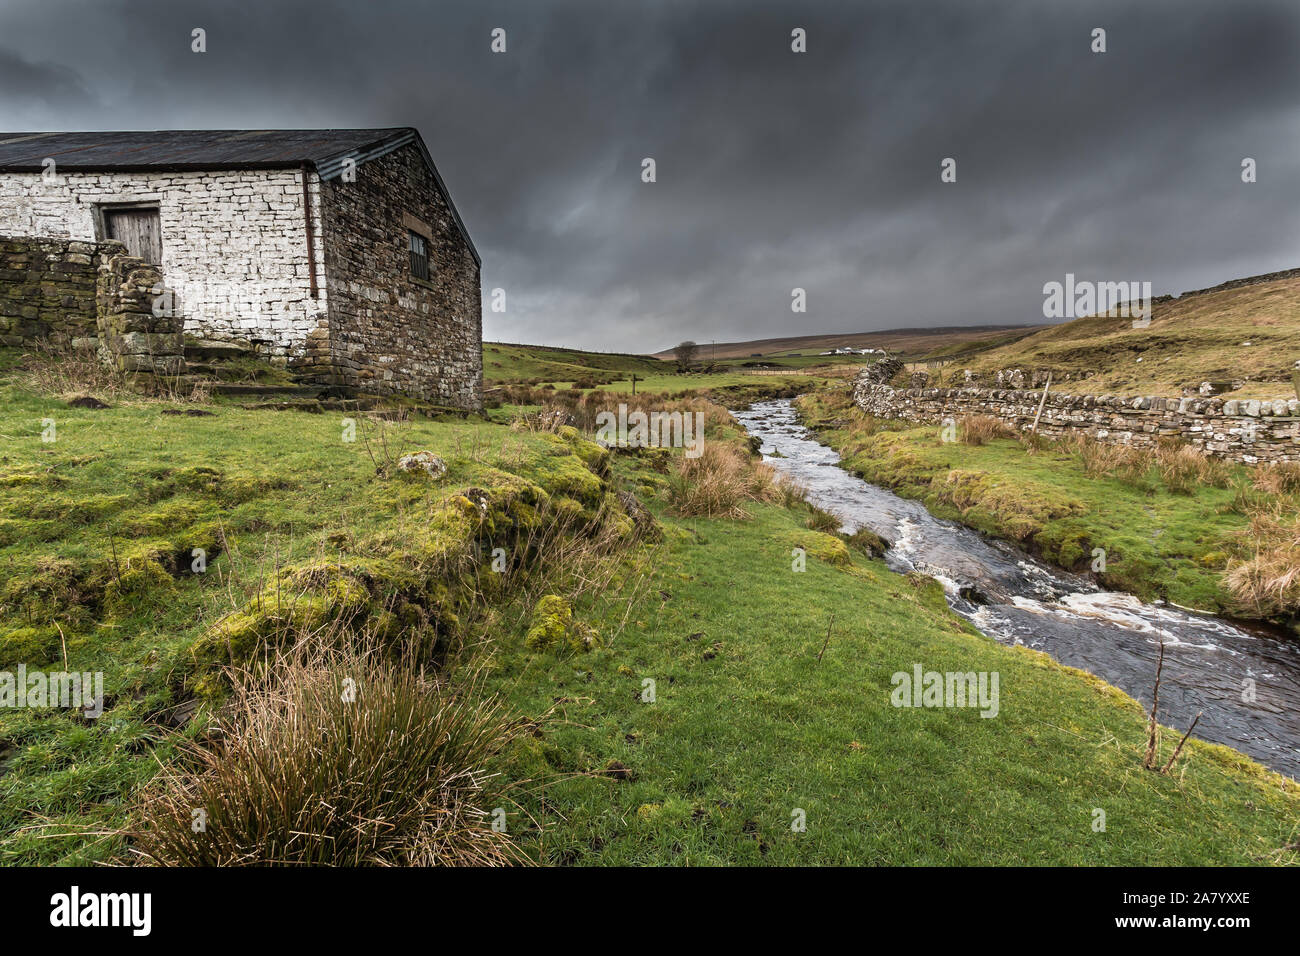 The remote and bleak hill farm at High Beck Head, Upper Teesdale, UK Stock Photo